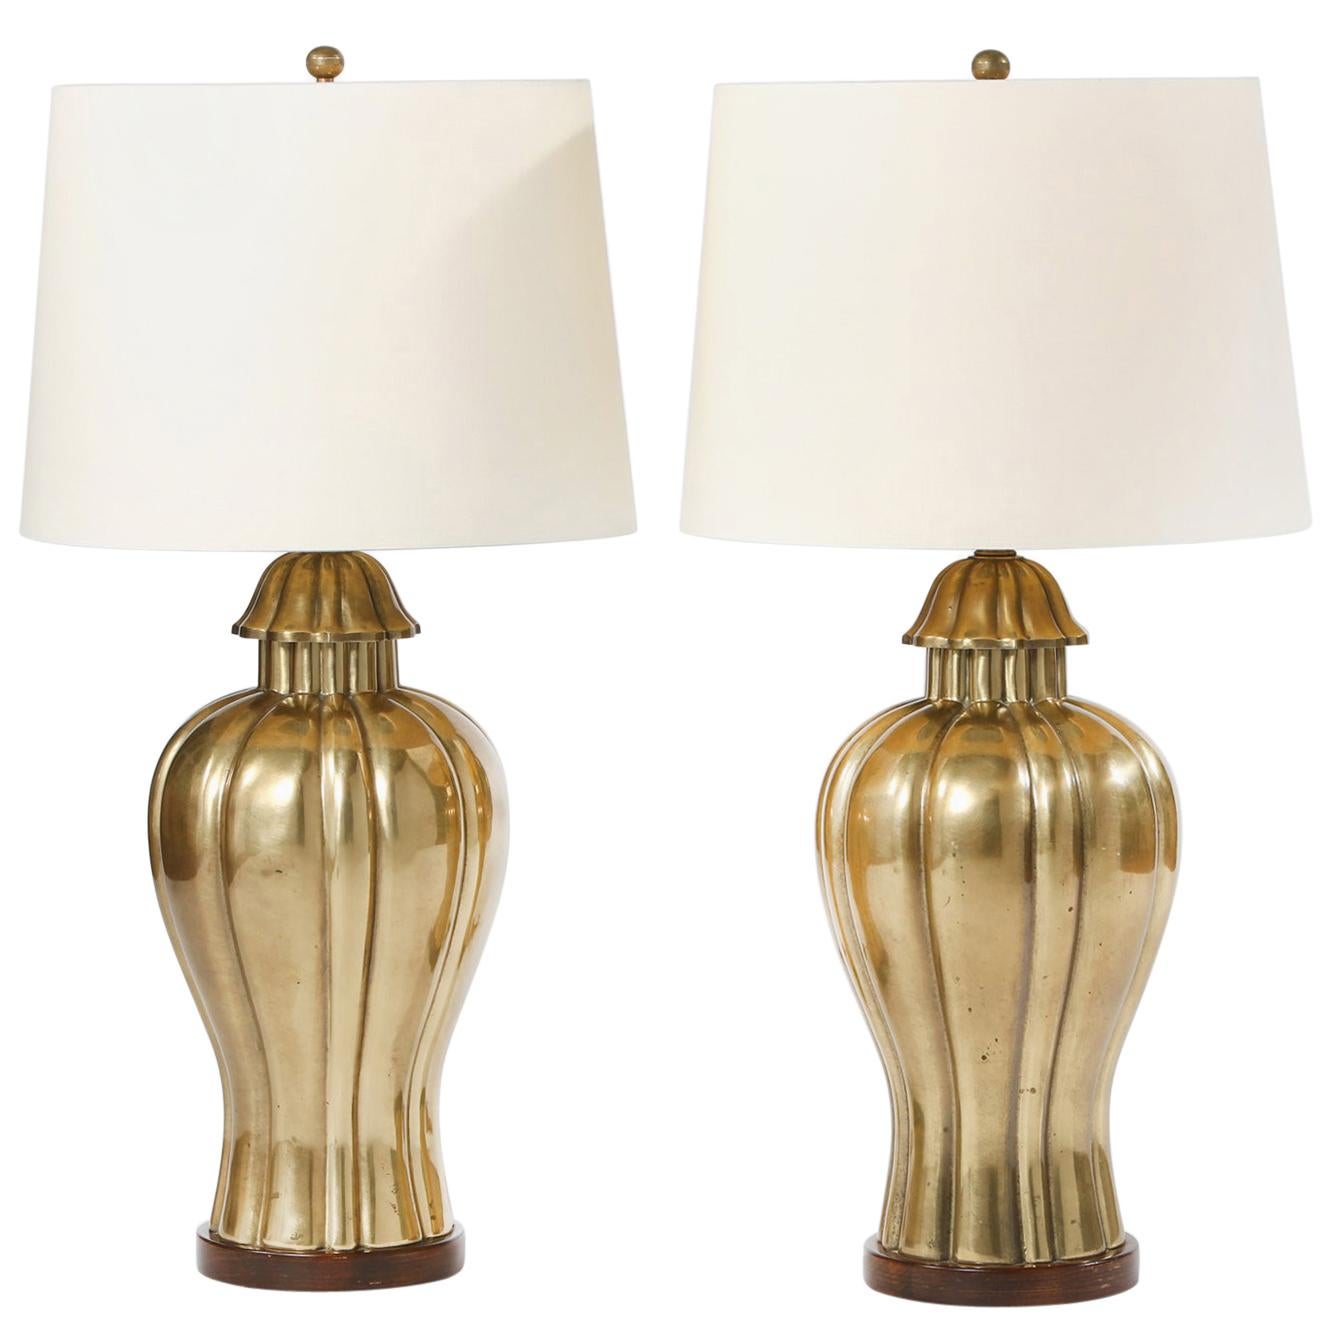 Mid-20th Century Brass Pair of Table Lamps / Wood Base